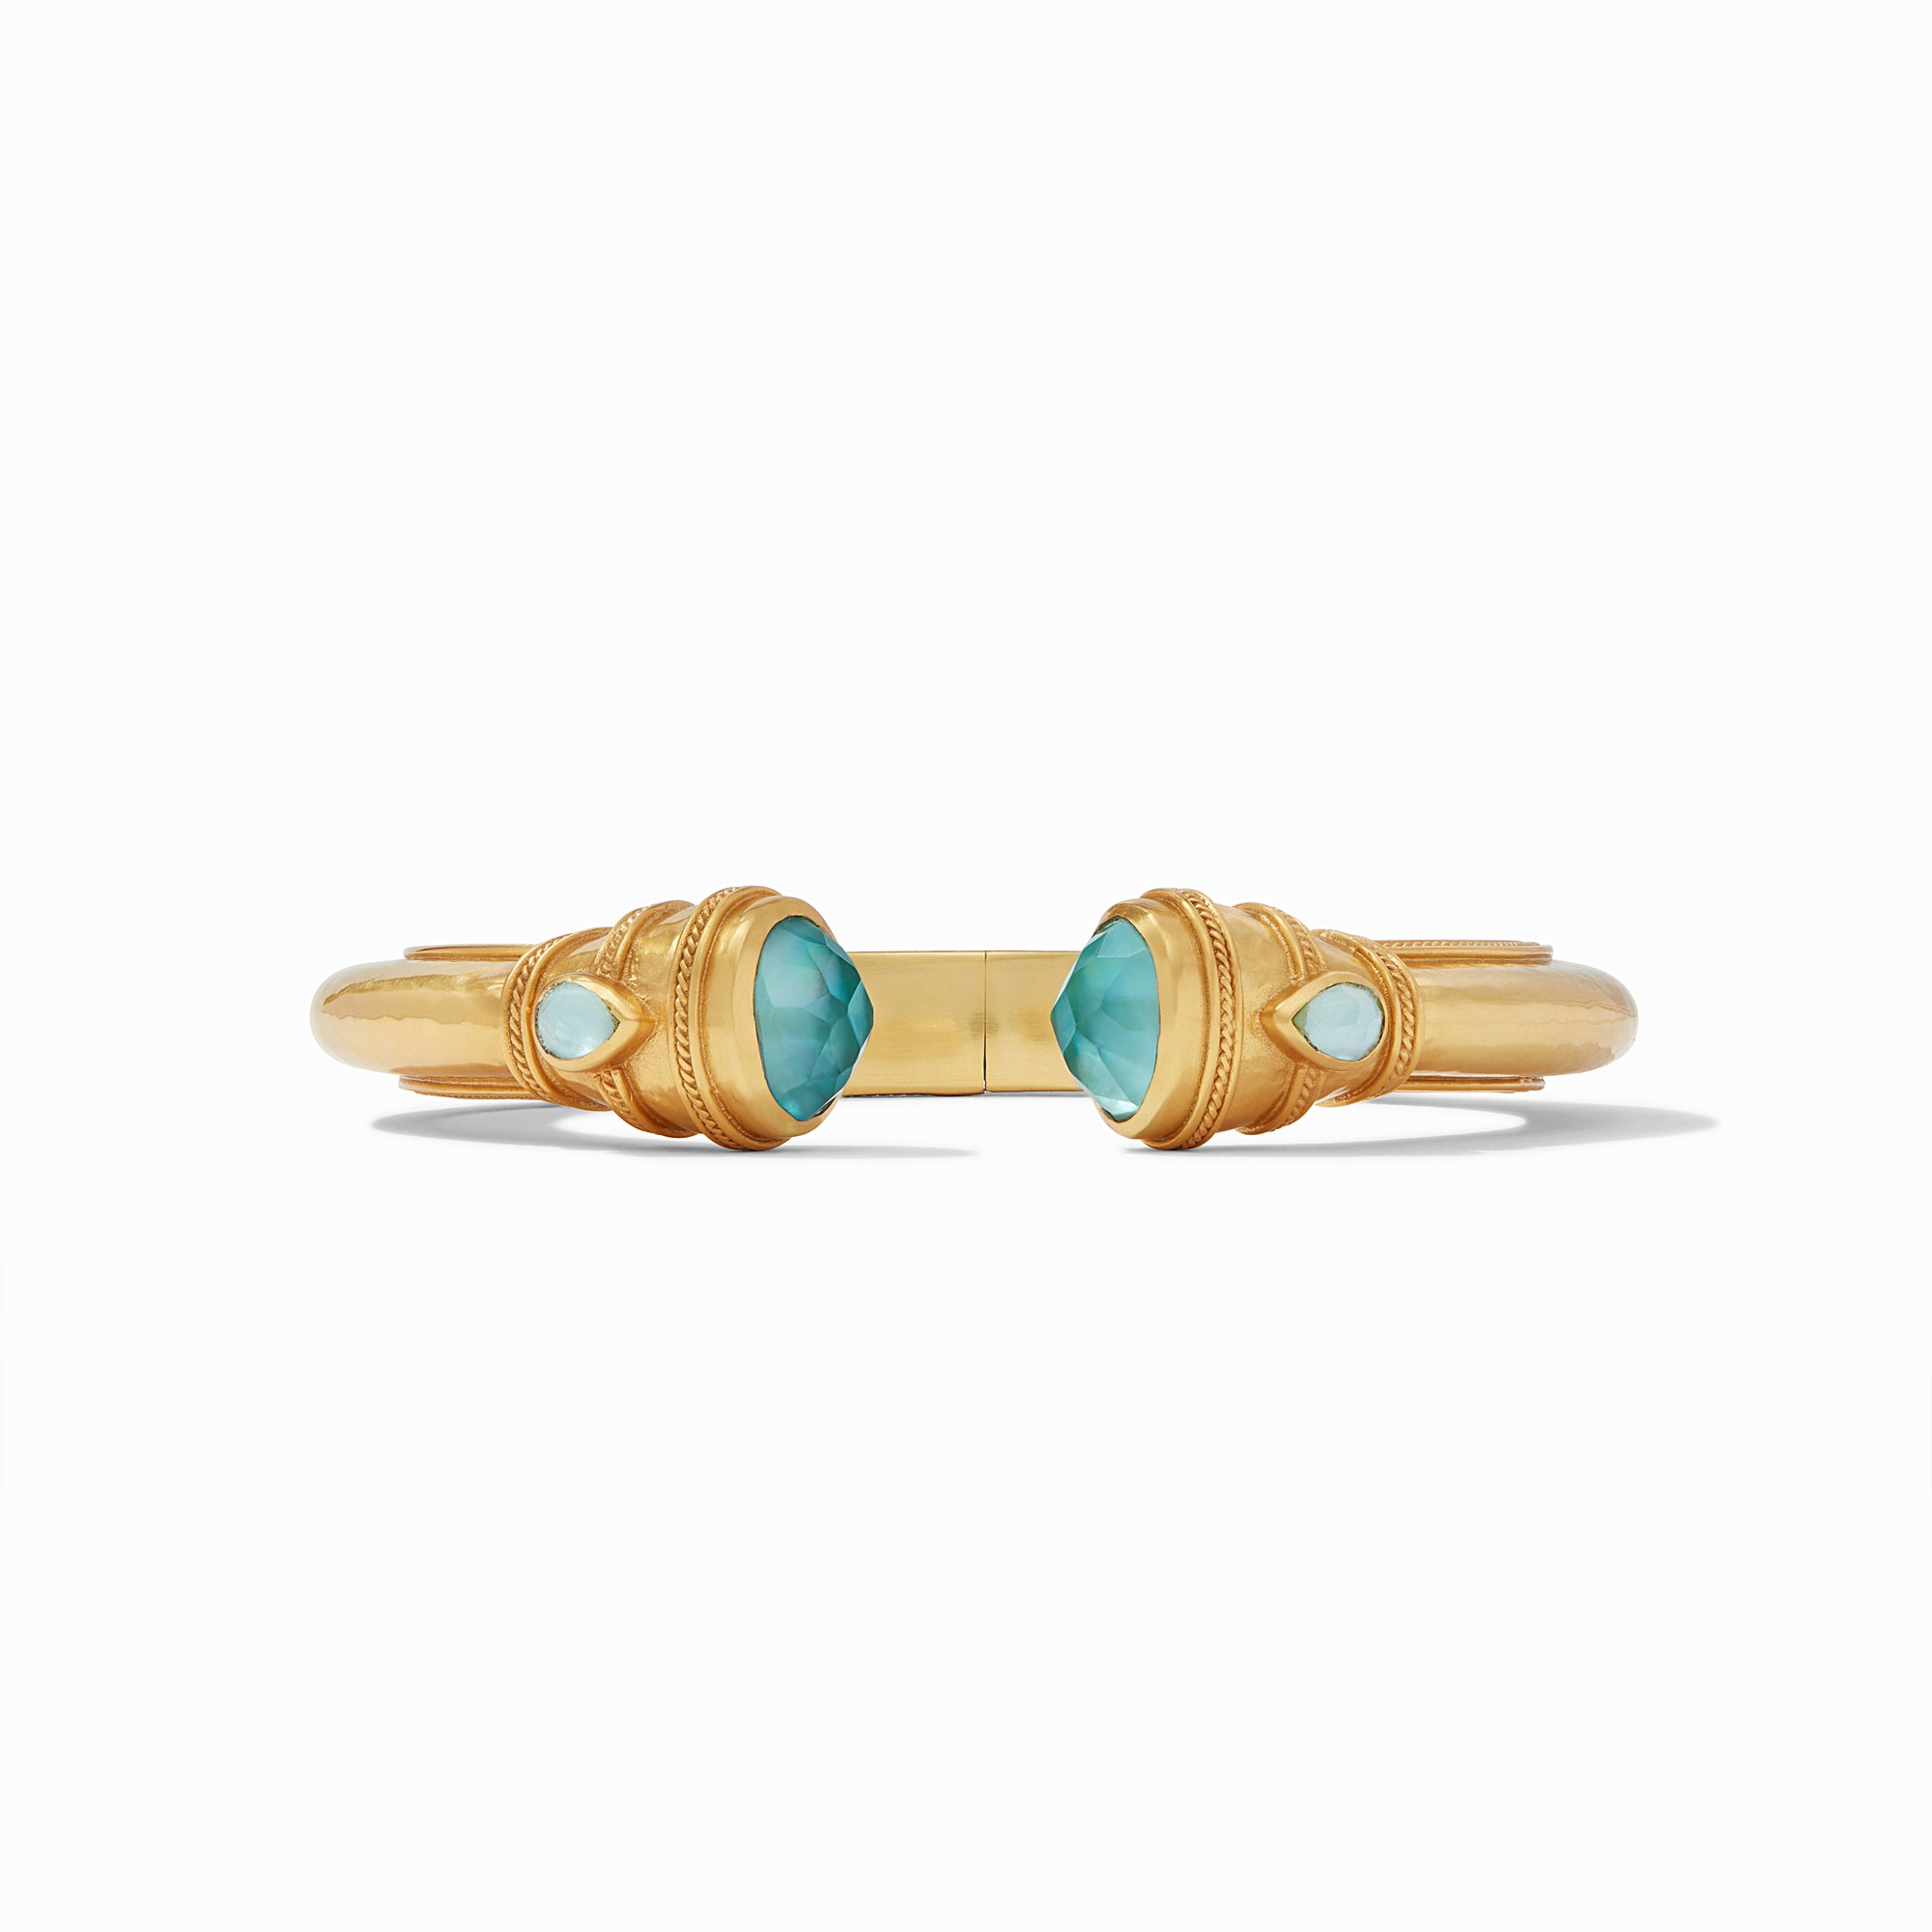 Cassis, a Julie Vos Hinge Cuff bracelet in the Iridescent Bahamian Blue option